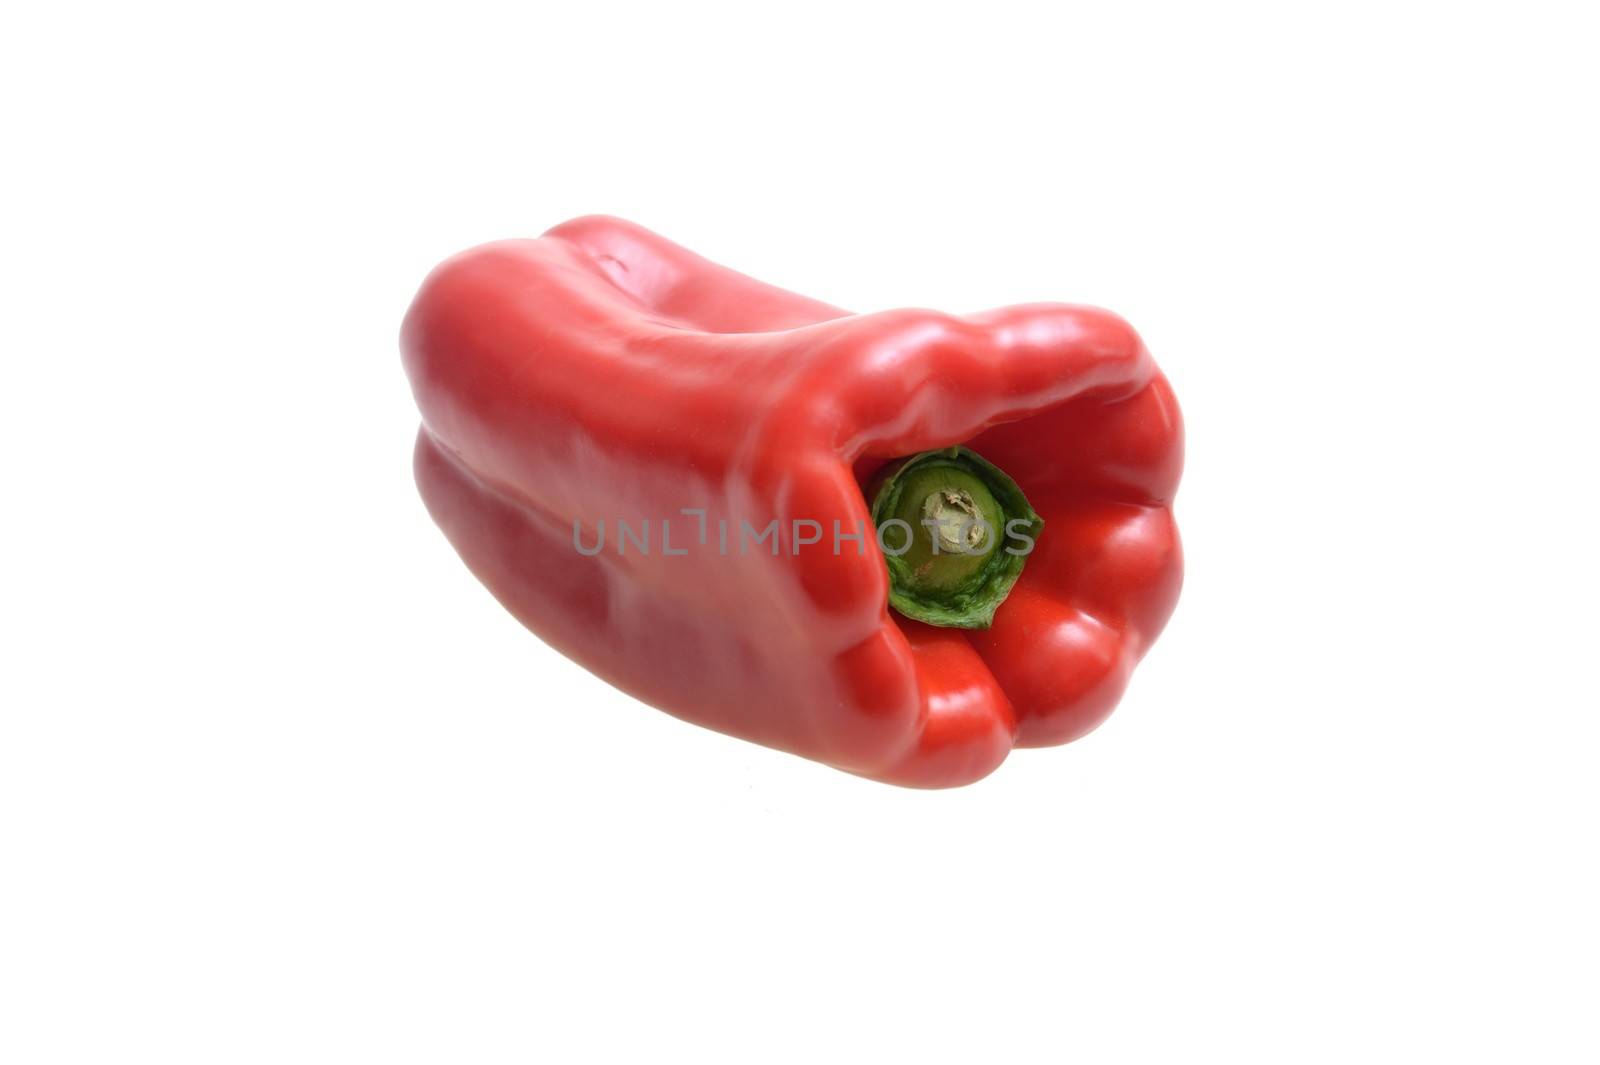 Capsicum by Kitch